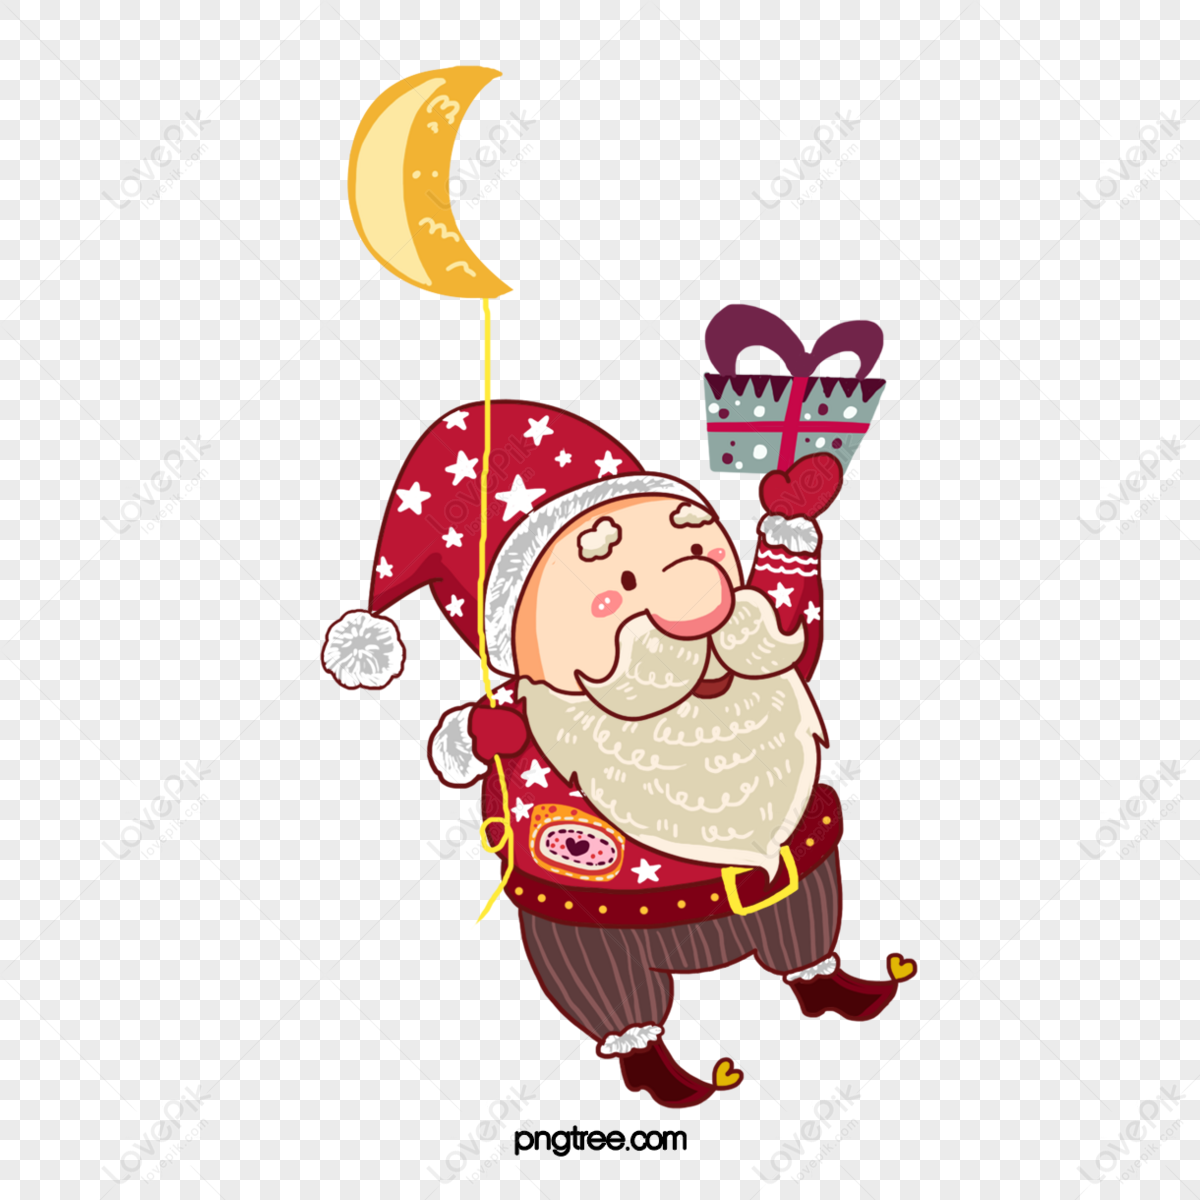 Santa Claus holding a present,print,graphic,animal free png